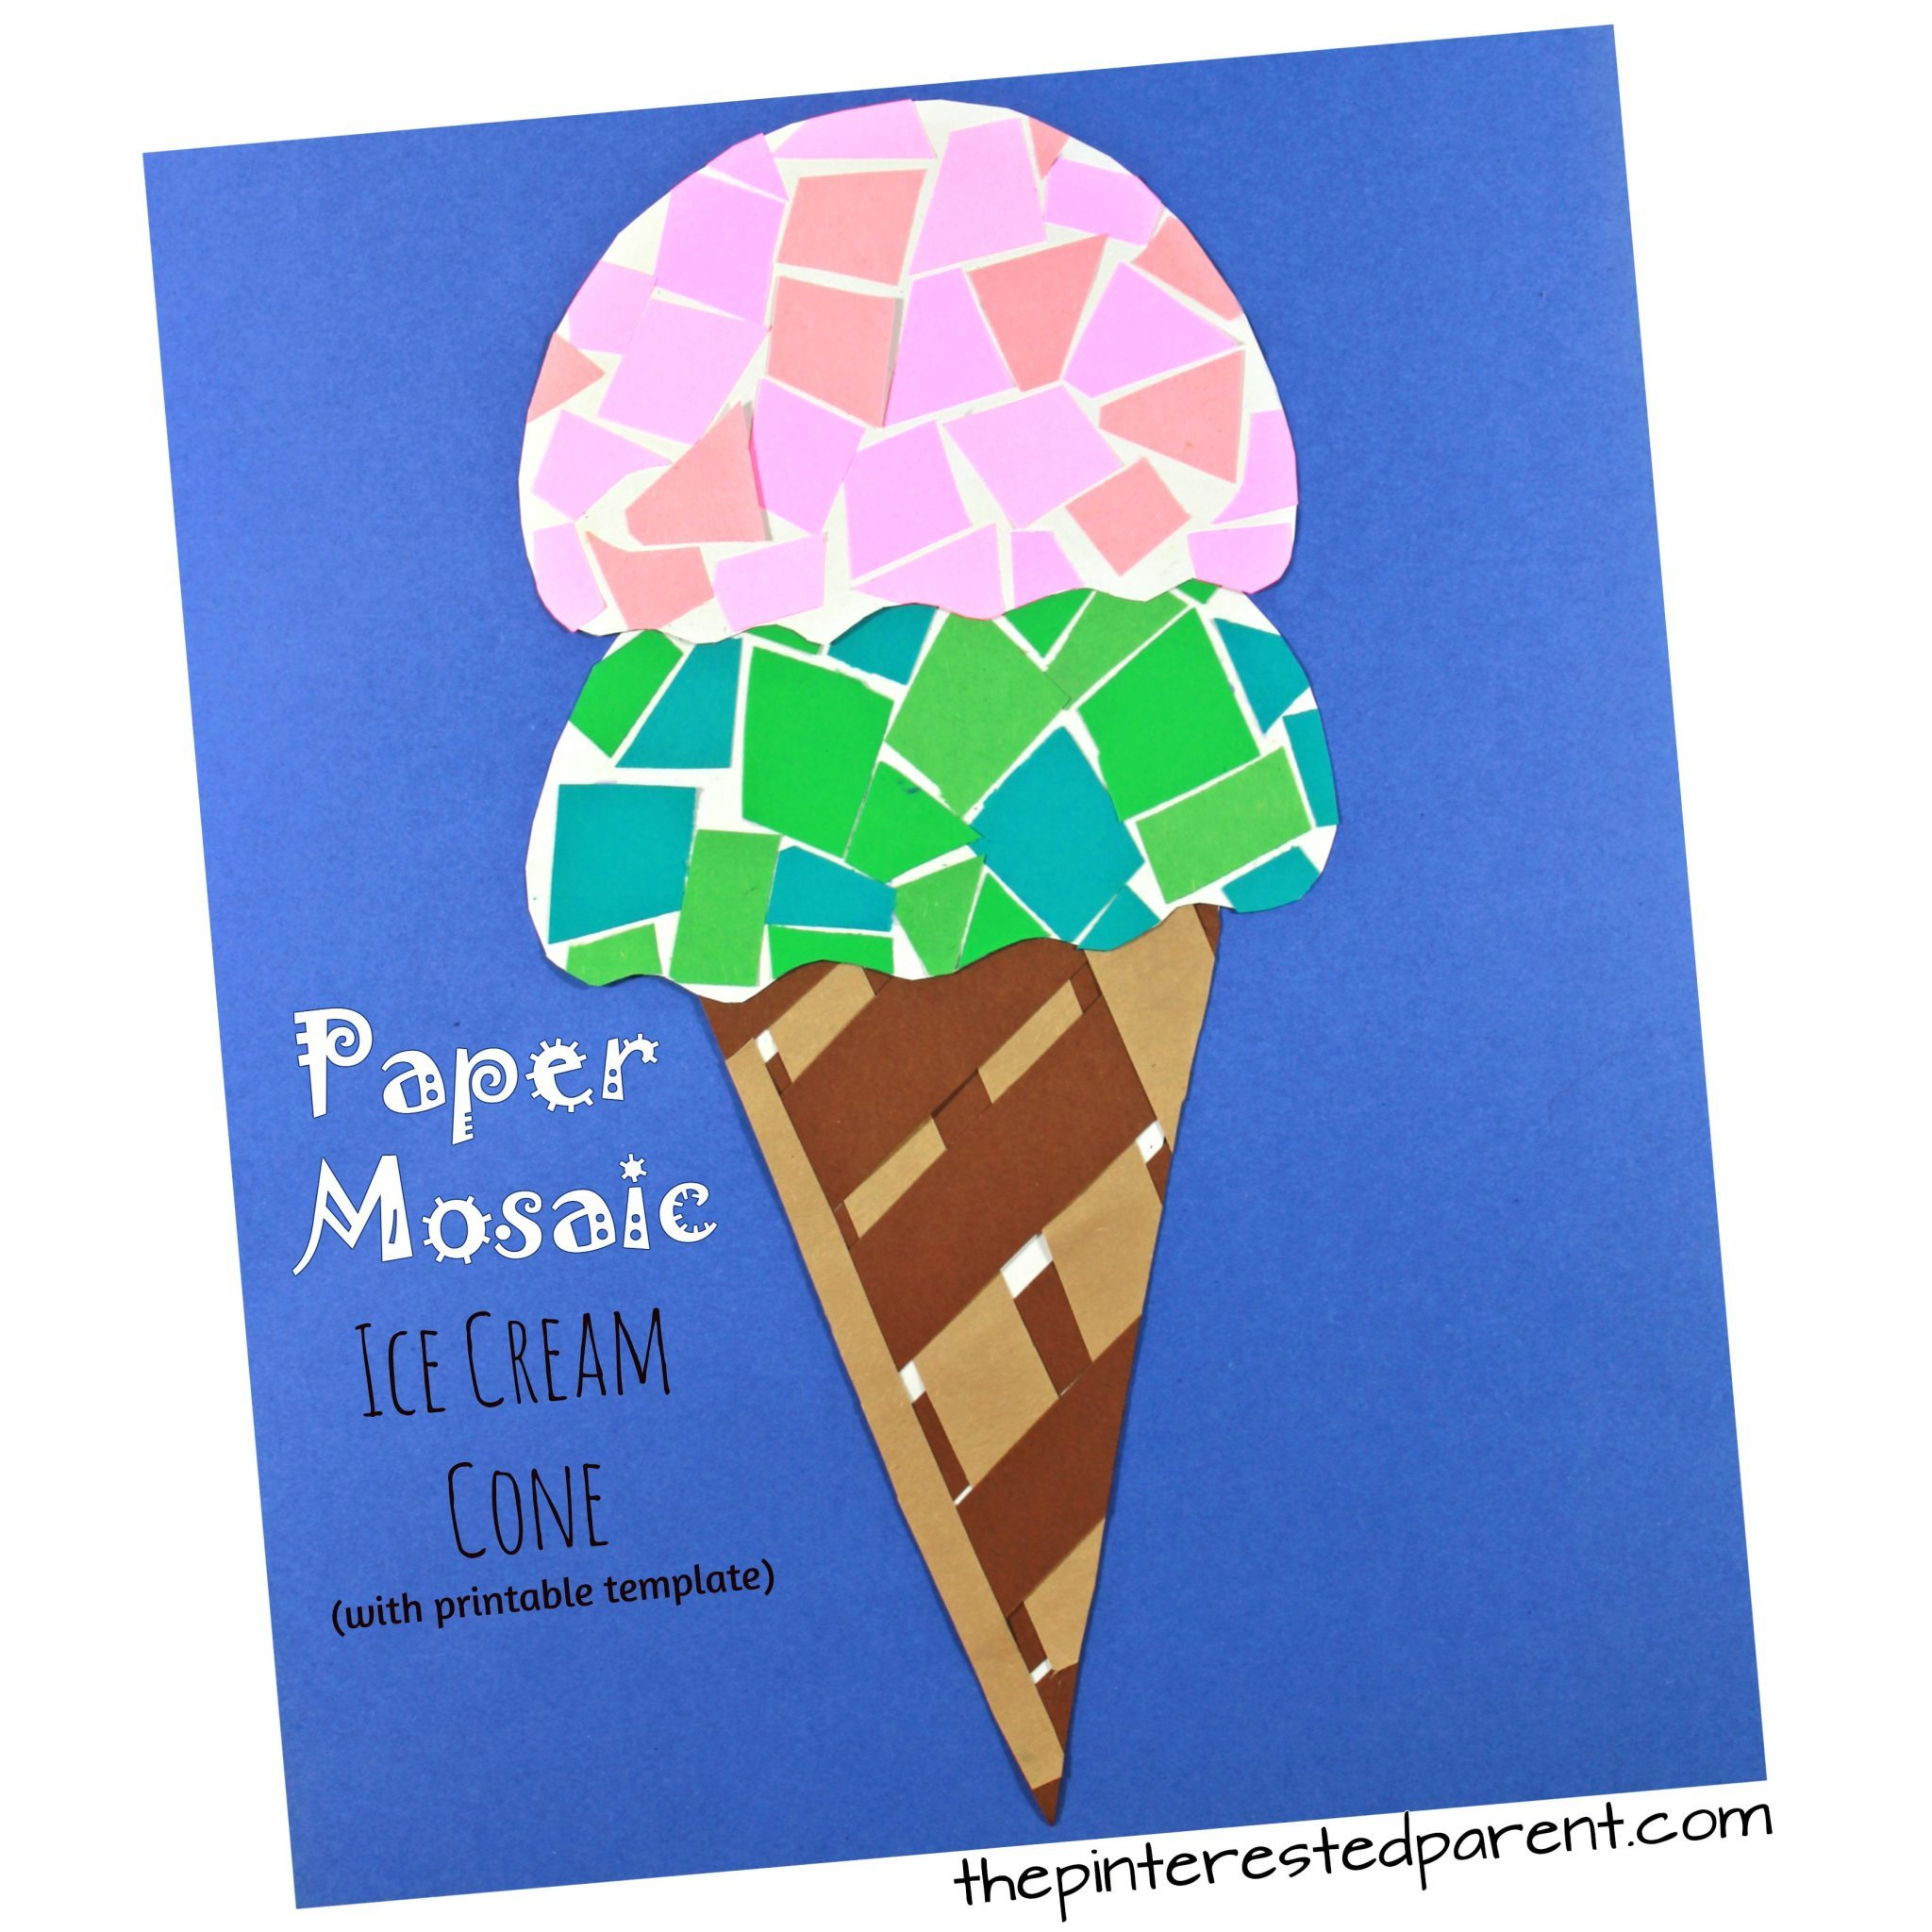 Printable Paper Mosaic Ice Cream Cone – The Pinterested Parent - Ice Cream Cone Template Free Printable